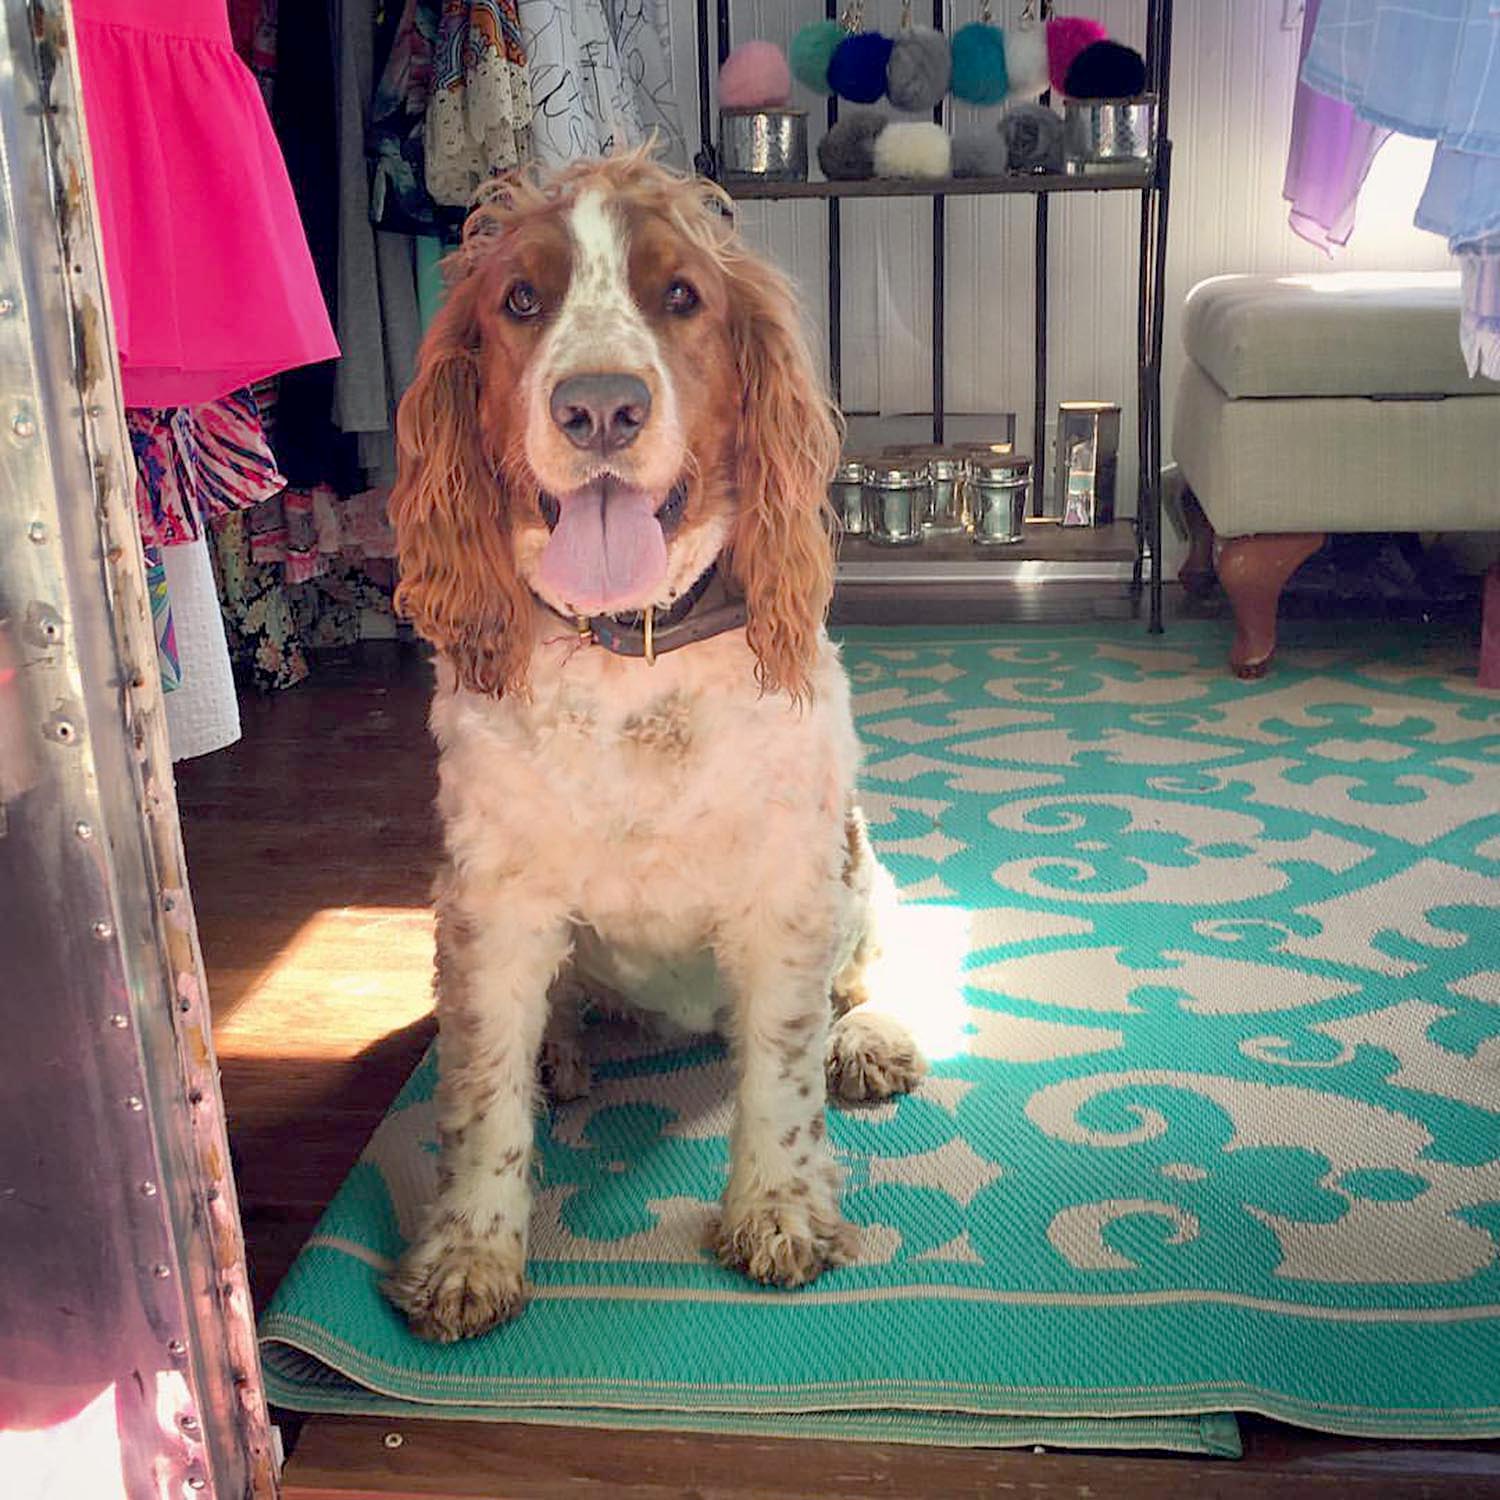 We love our sweet shop dog!